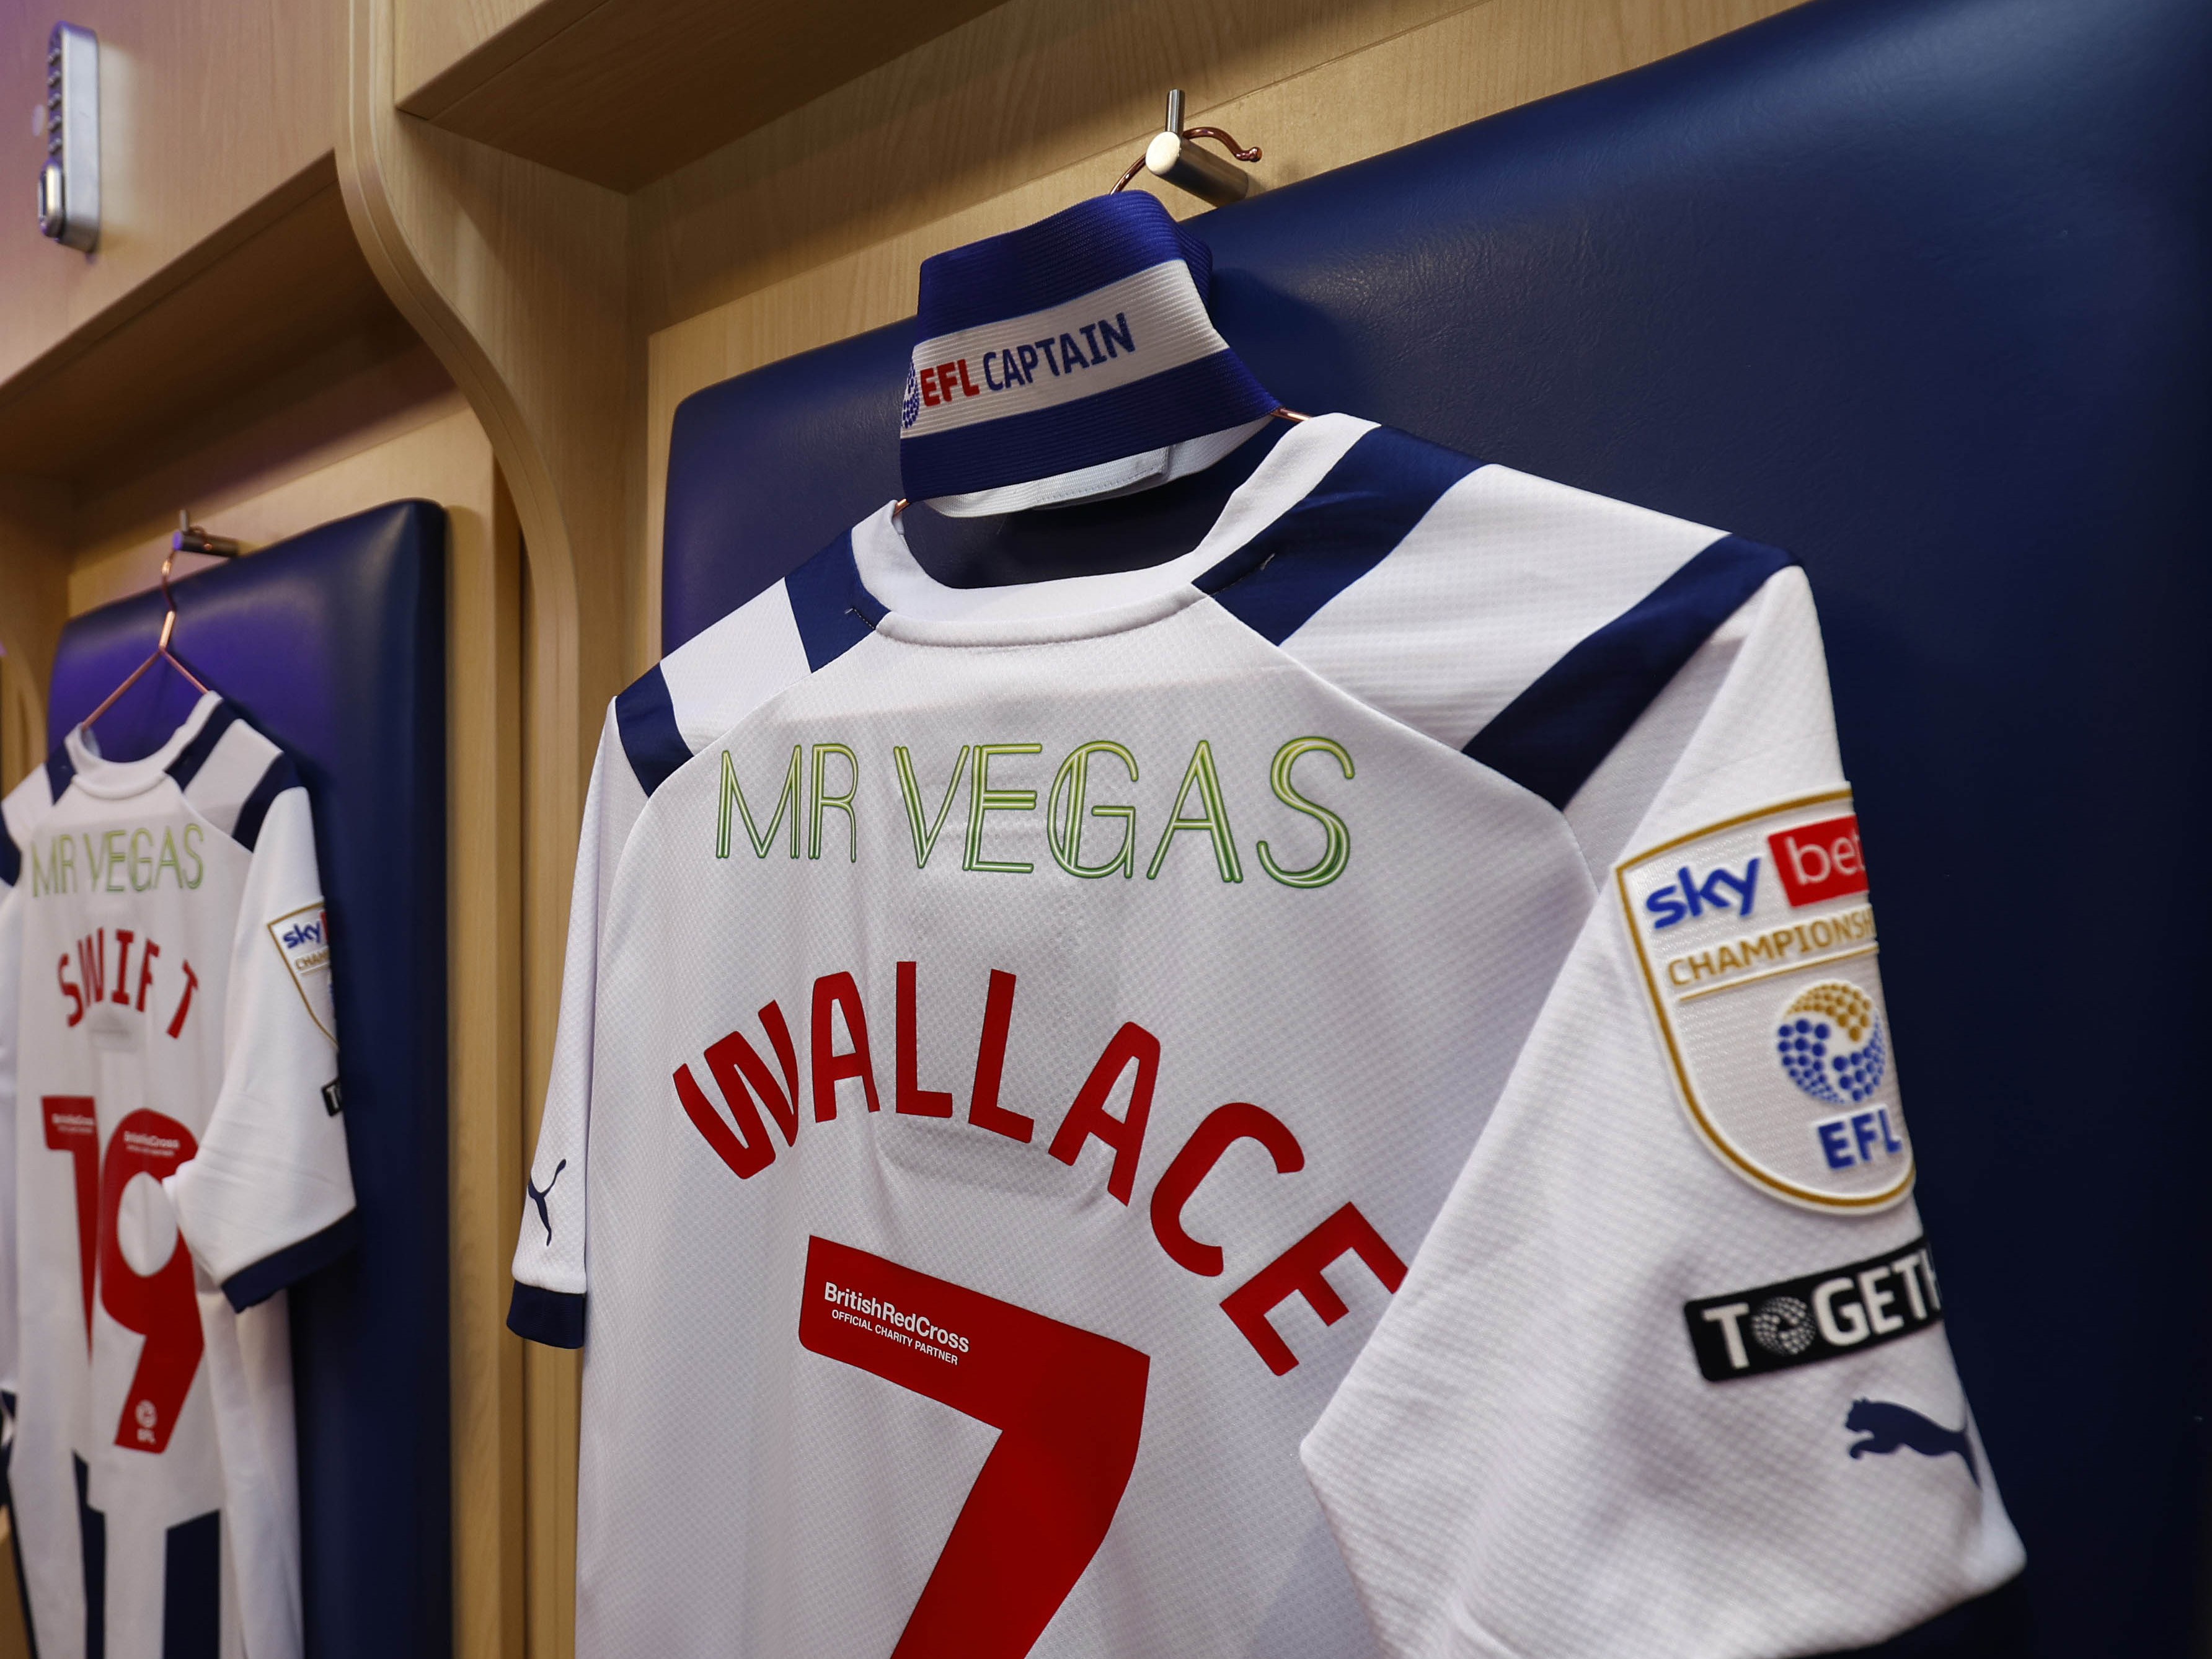 Jed Wallace's shirt and armband with Mr Vegas branding on